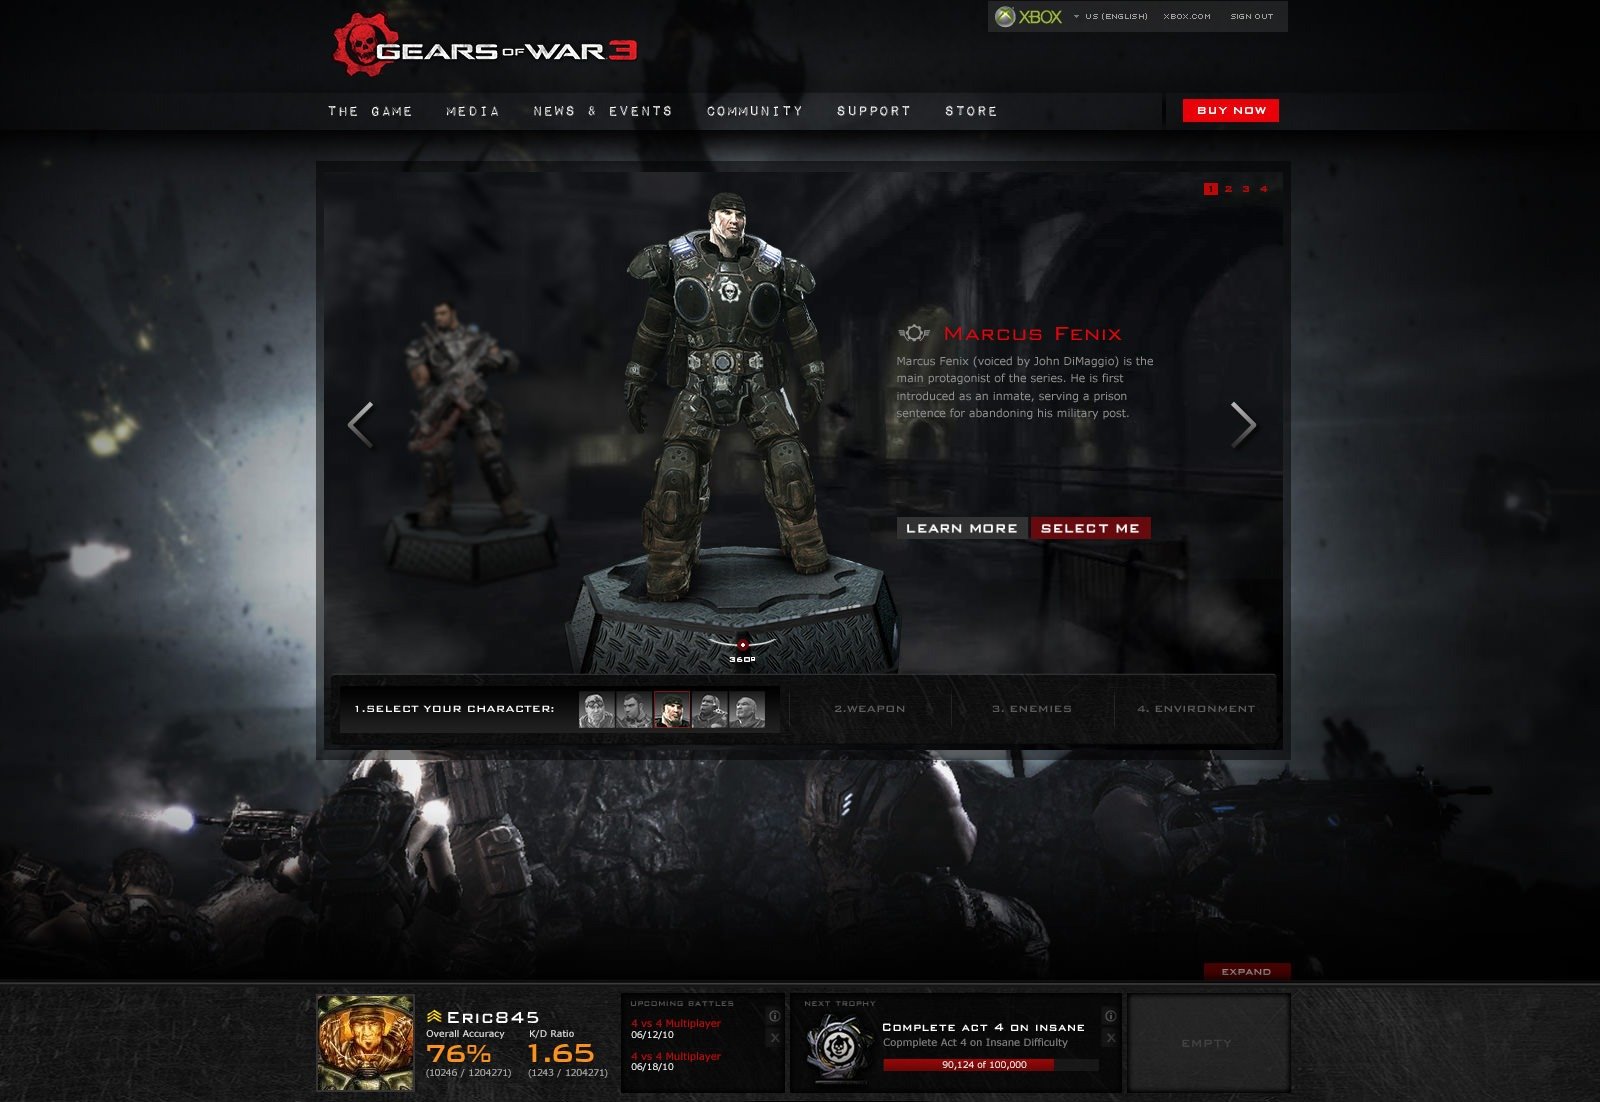 Epic Games Xbox Game Studios Gears of War 3 - Select your character